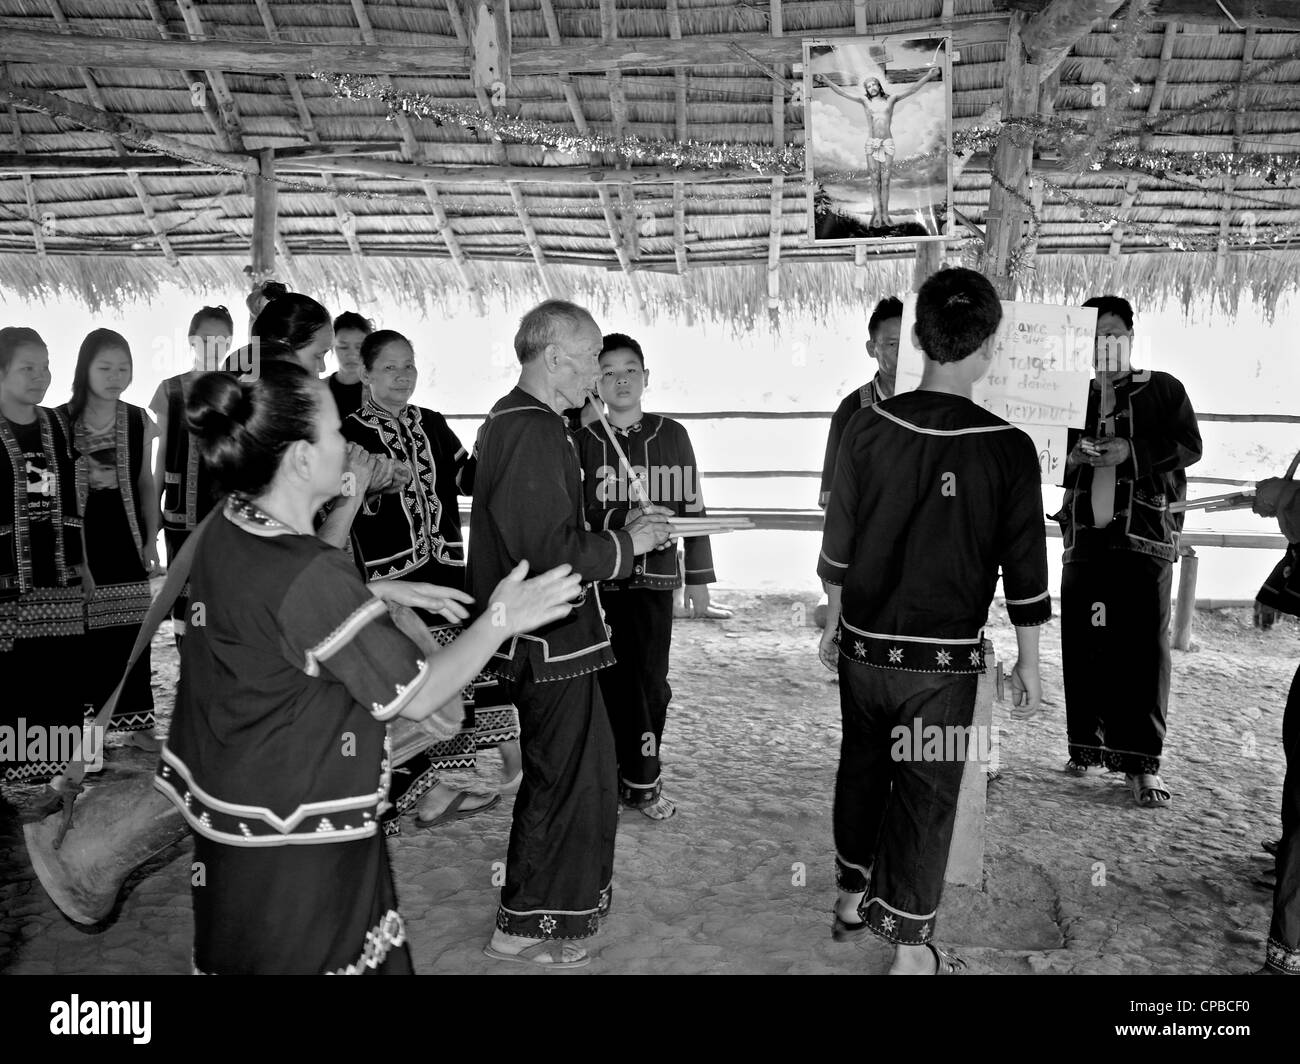 Lahu people of Thailand's Northern hilltribes. Christian in their believe and seen here worshiping Christ. Chiang Rai province. Rural Thai hill tribes Stock Photo